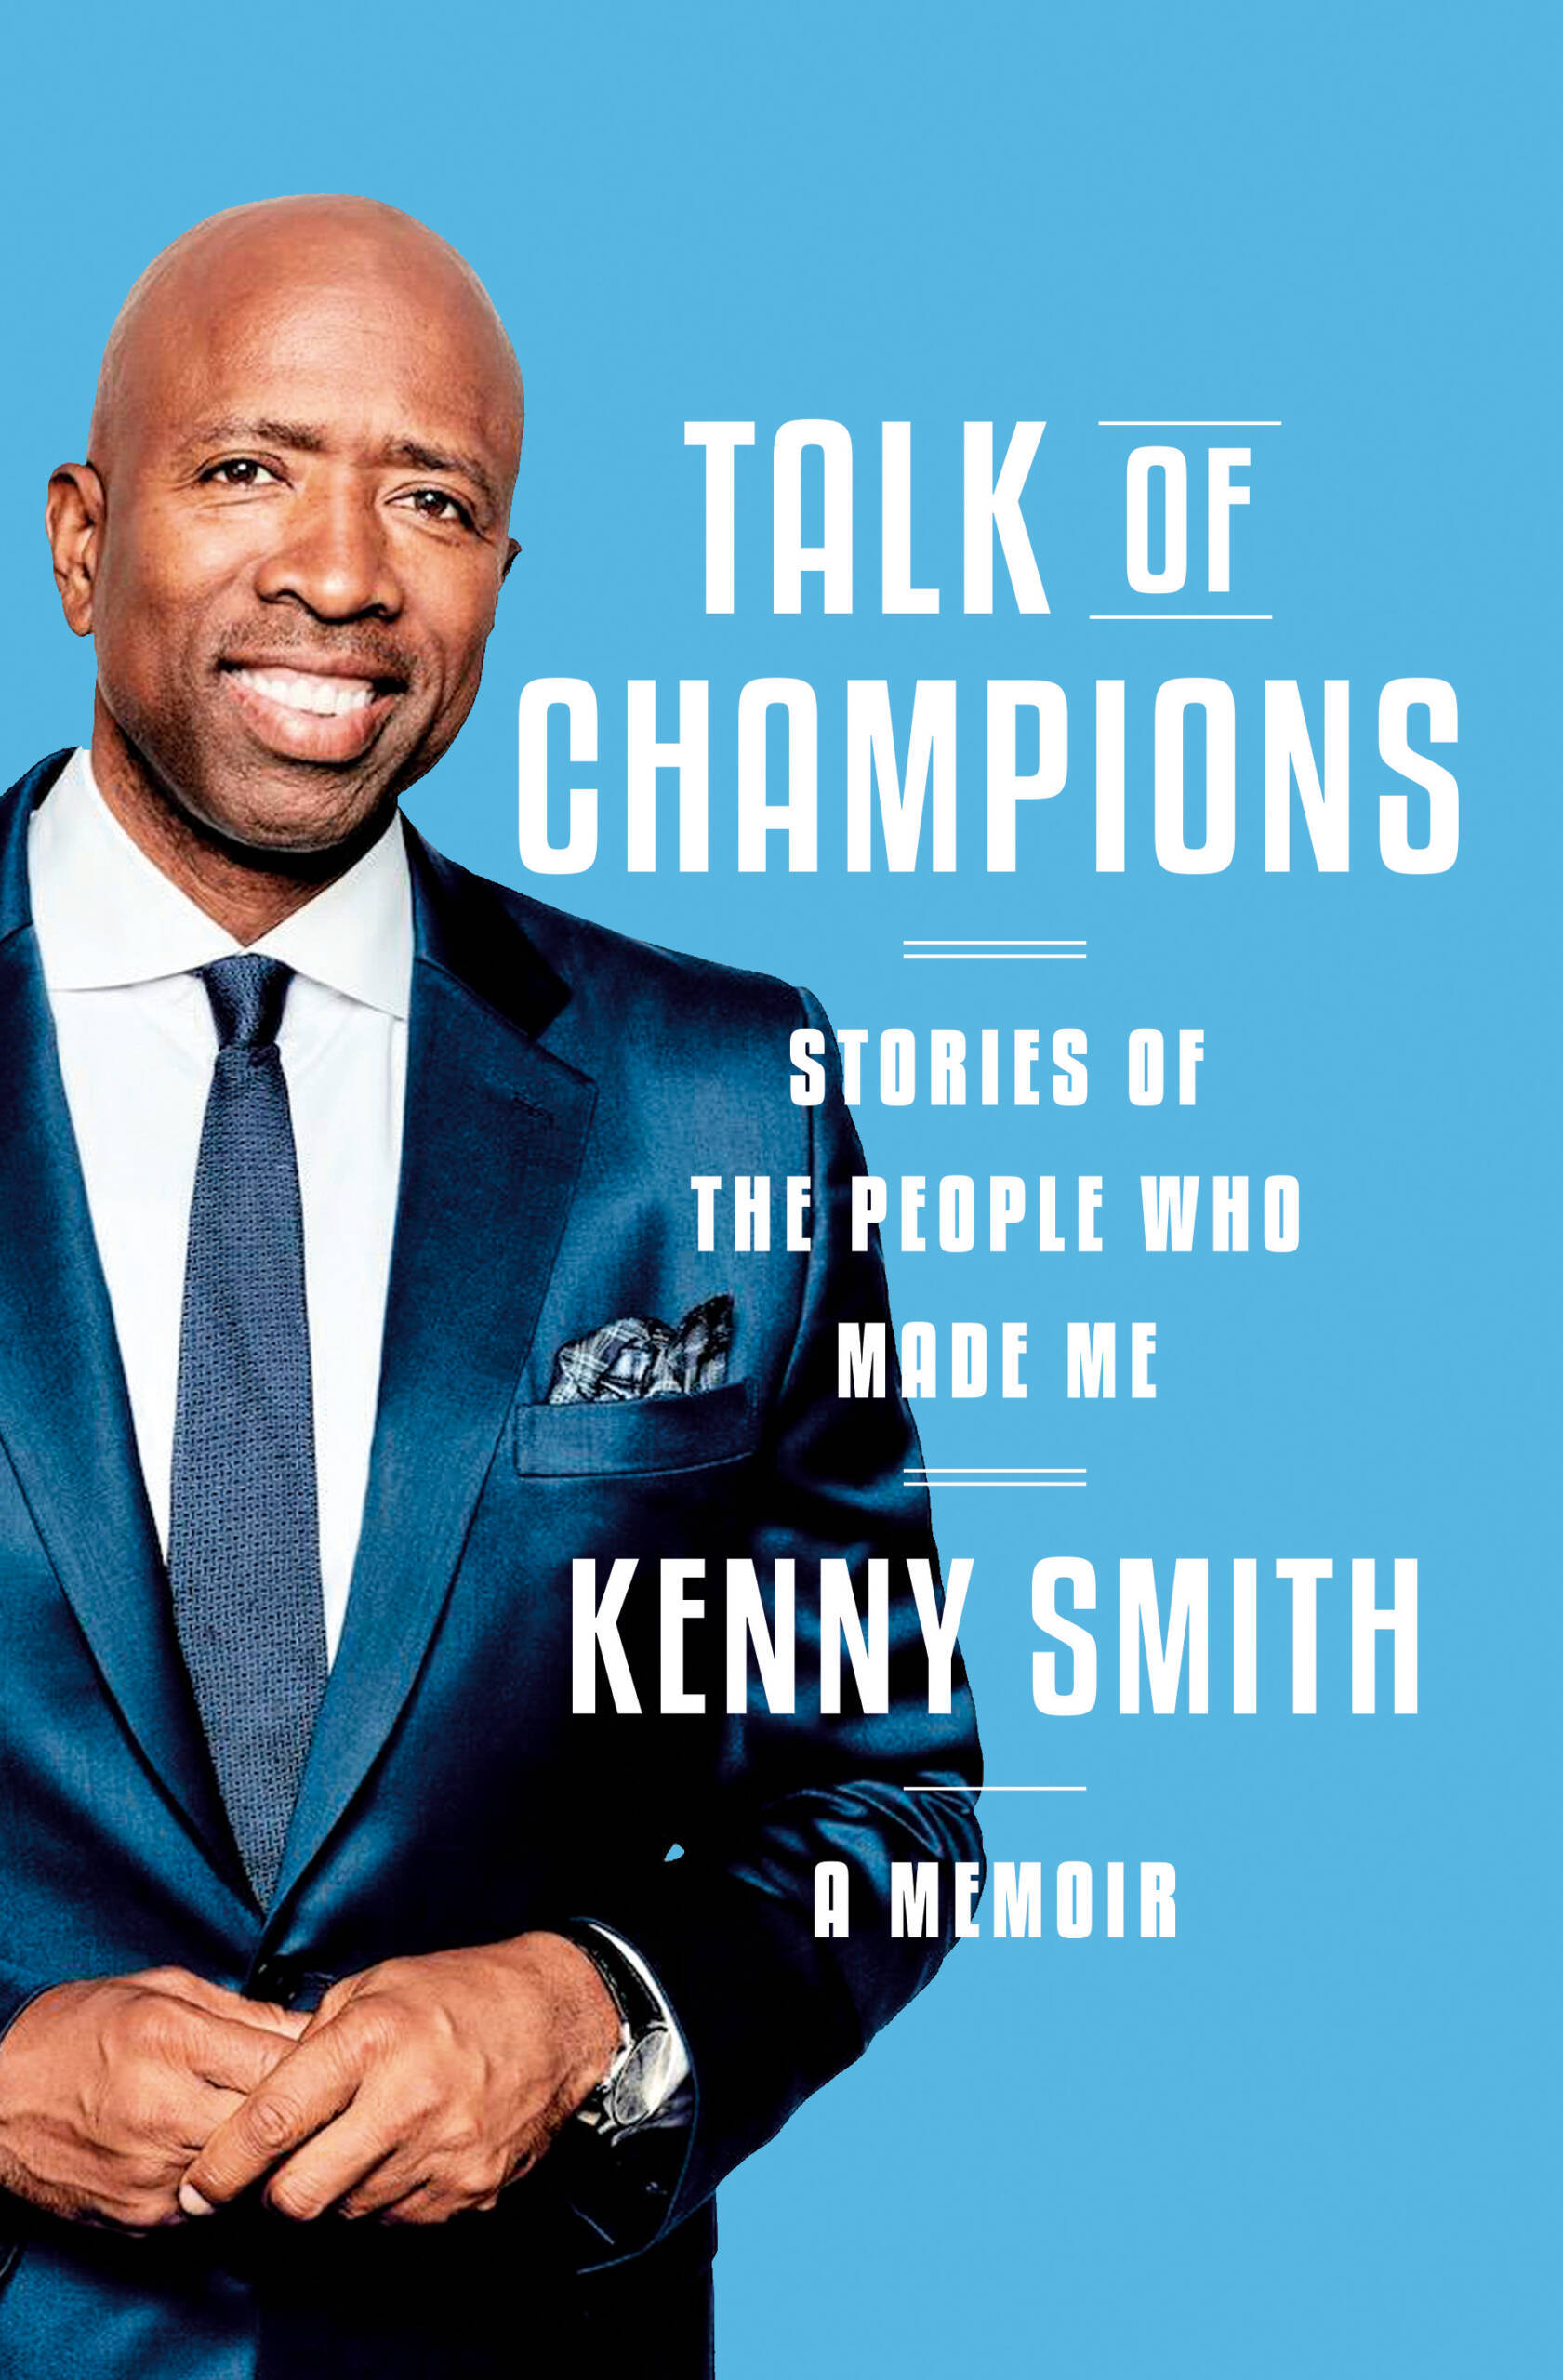 It's Kenny Smith from Inside the NBA! Oh, wait 